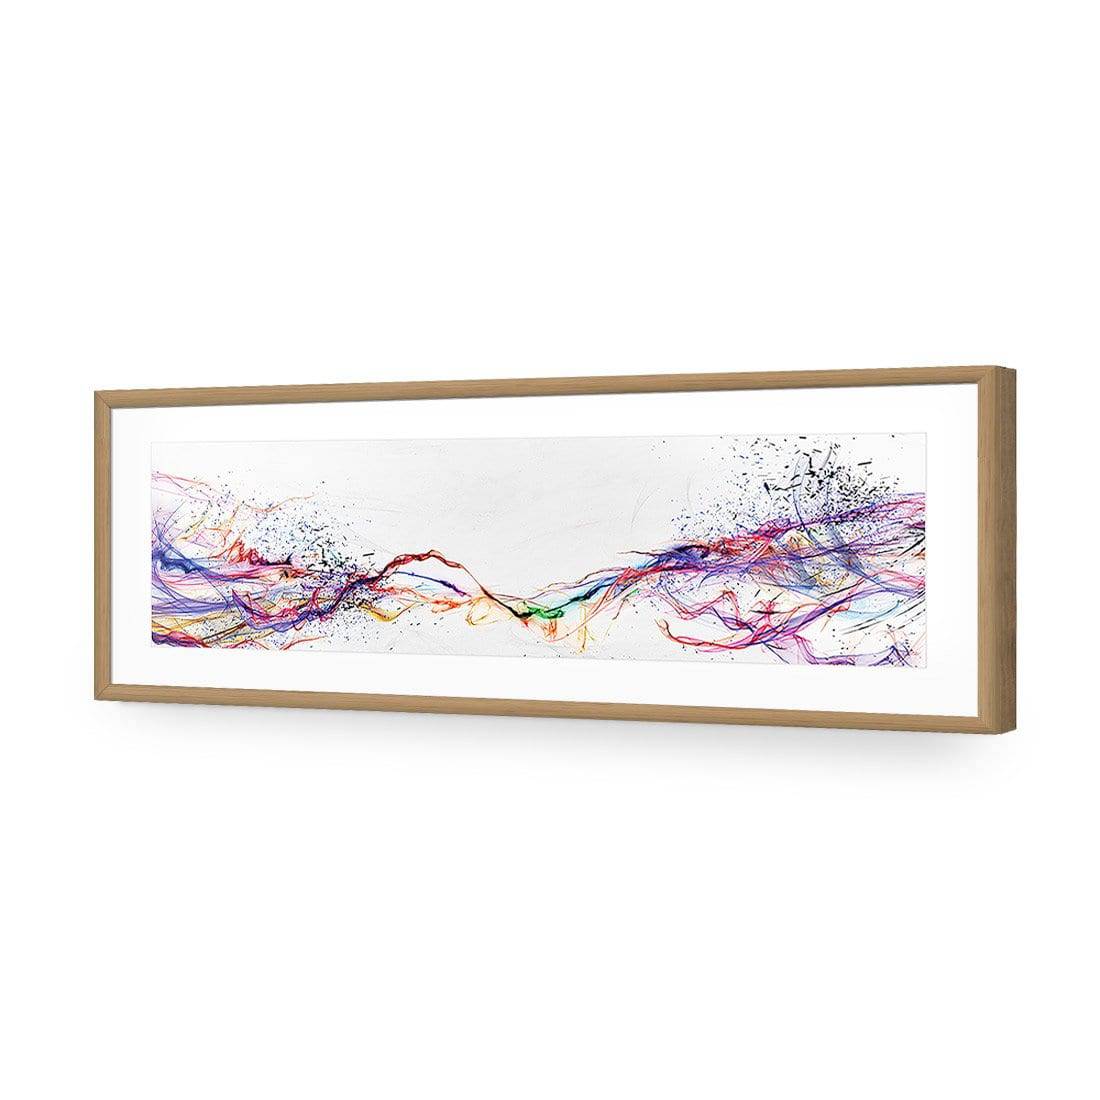 Electricity On Black, Inverted, Long-Acrylic-Wall Art Design-With Border-Acrylic - Oak Frame-60x20cm-Wall Art Designs